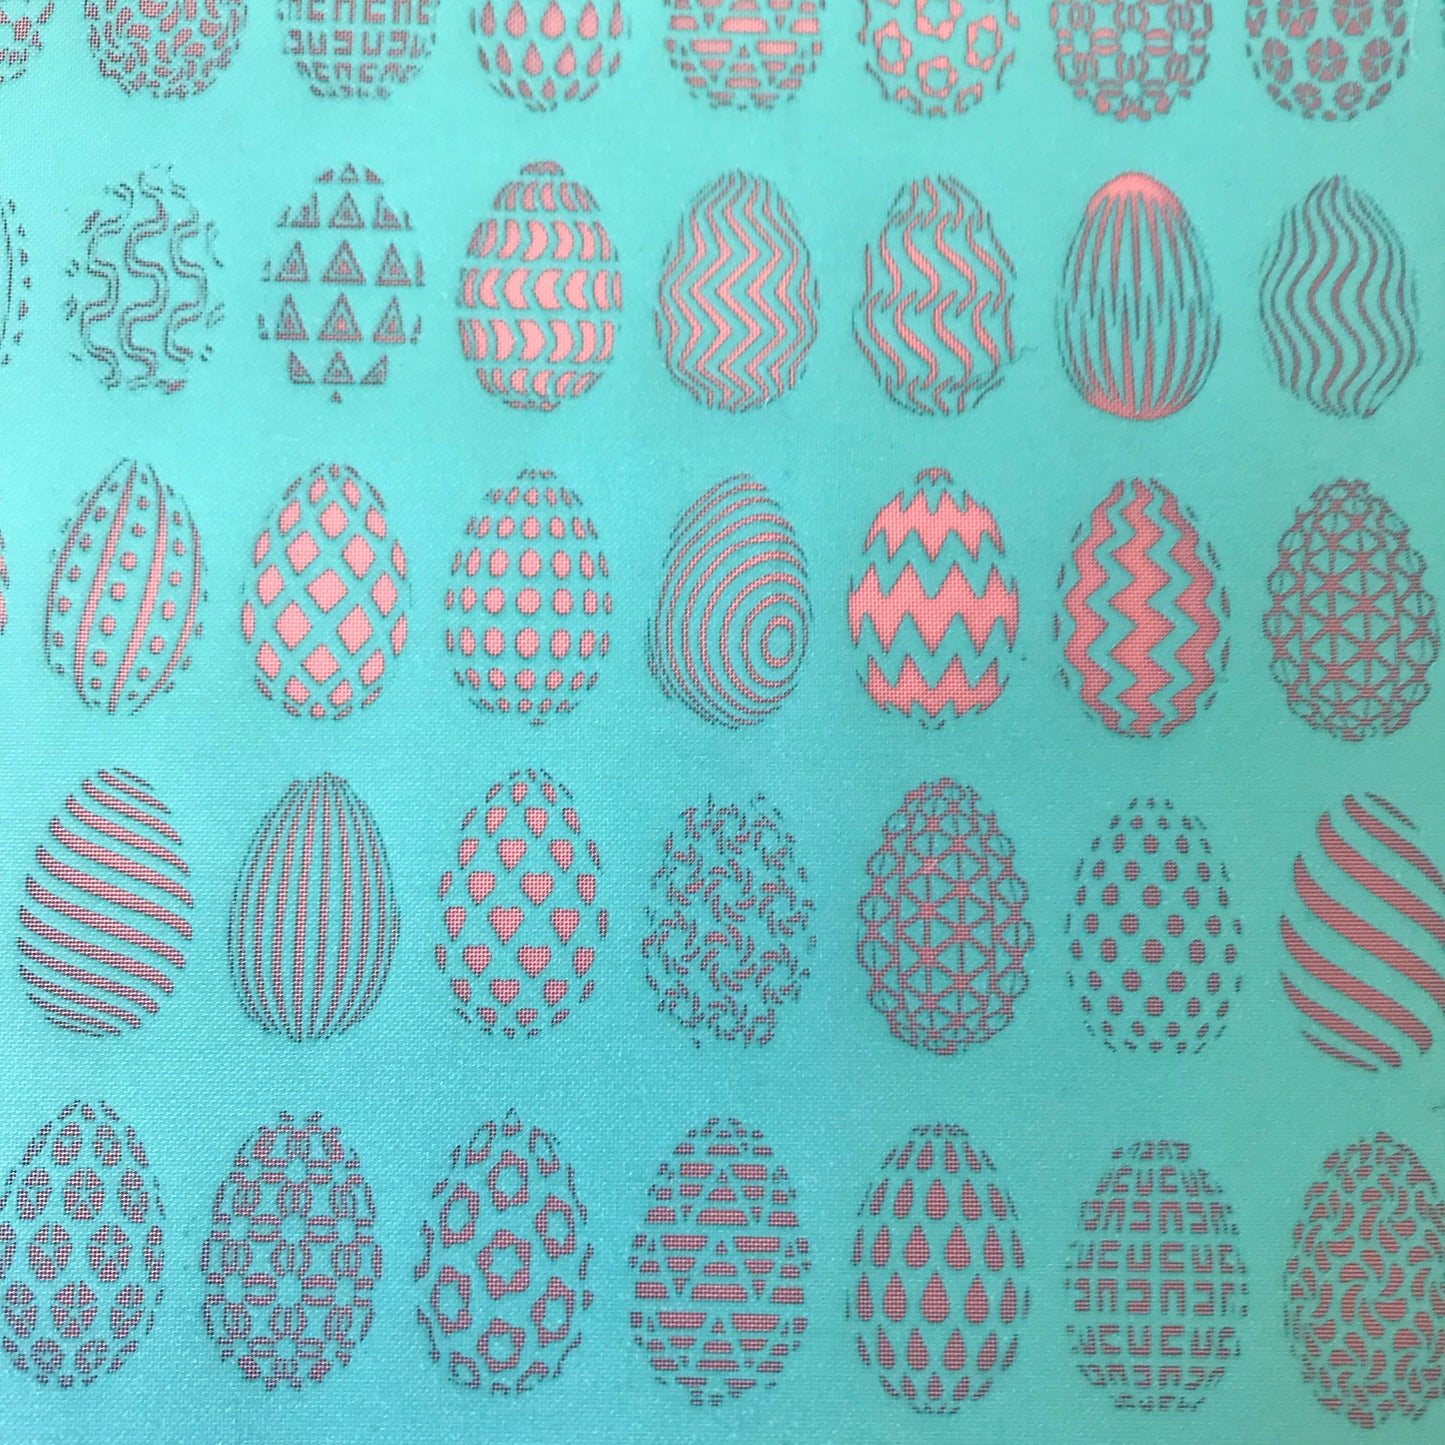 Eggtastic Easter egg hunt Silkscreen Stencil for Polymer Clay, Art Jewelry, Mixed Media